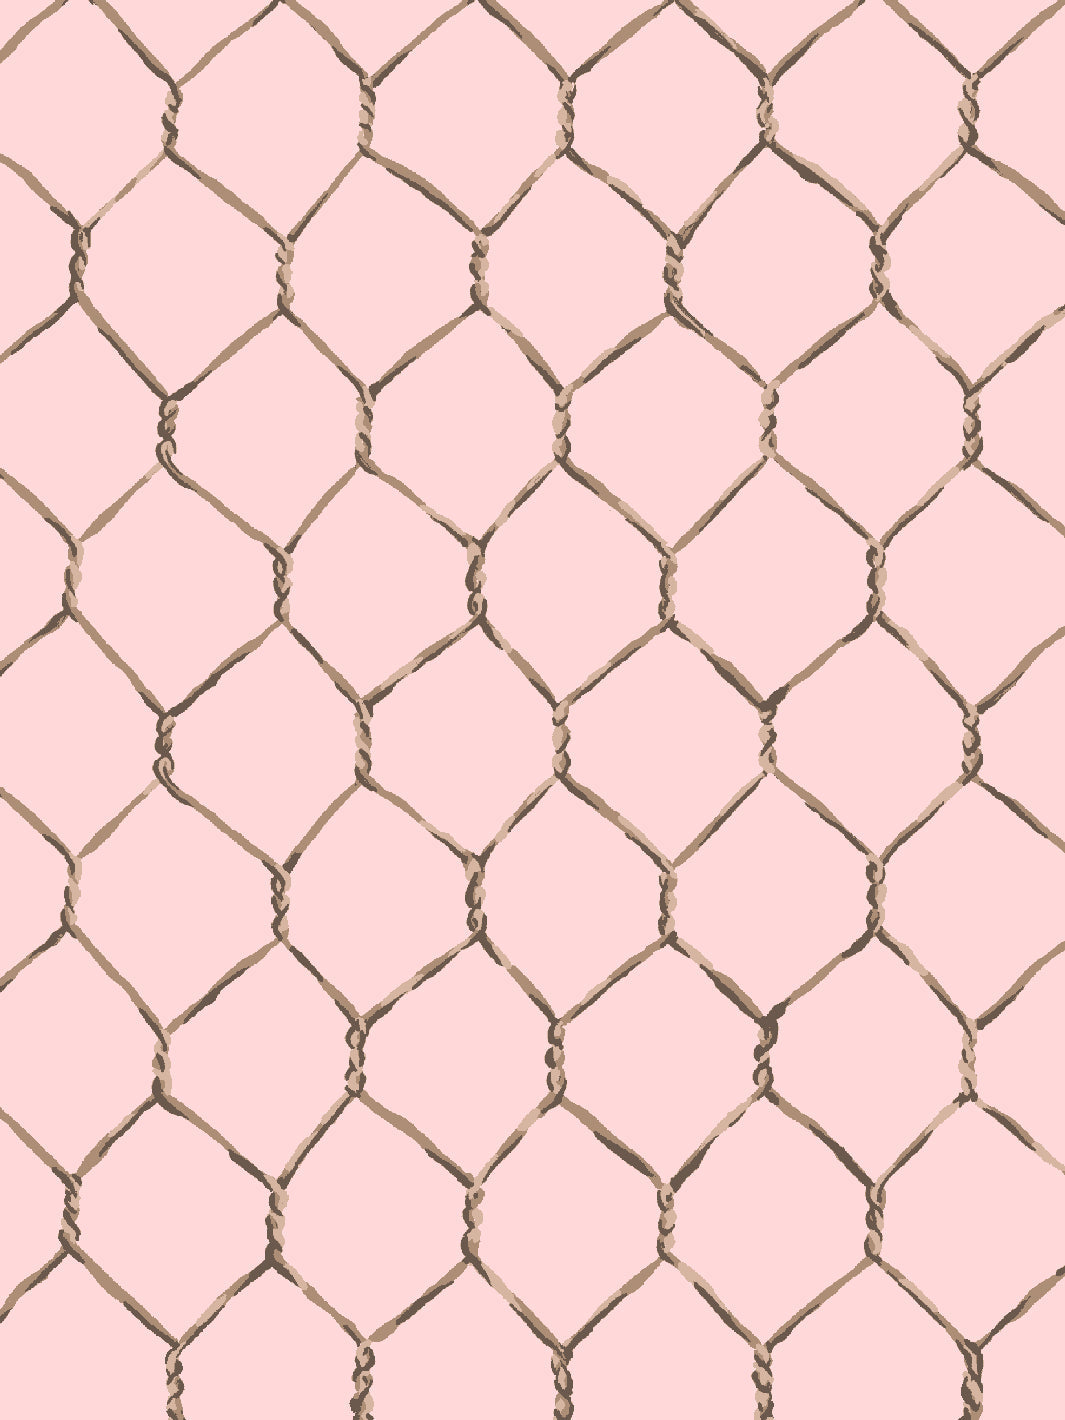 'Evelyn's Chicken Wire' Wallpaper by Sarah Jessica Parker - Sable on Pink